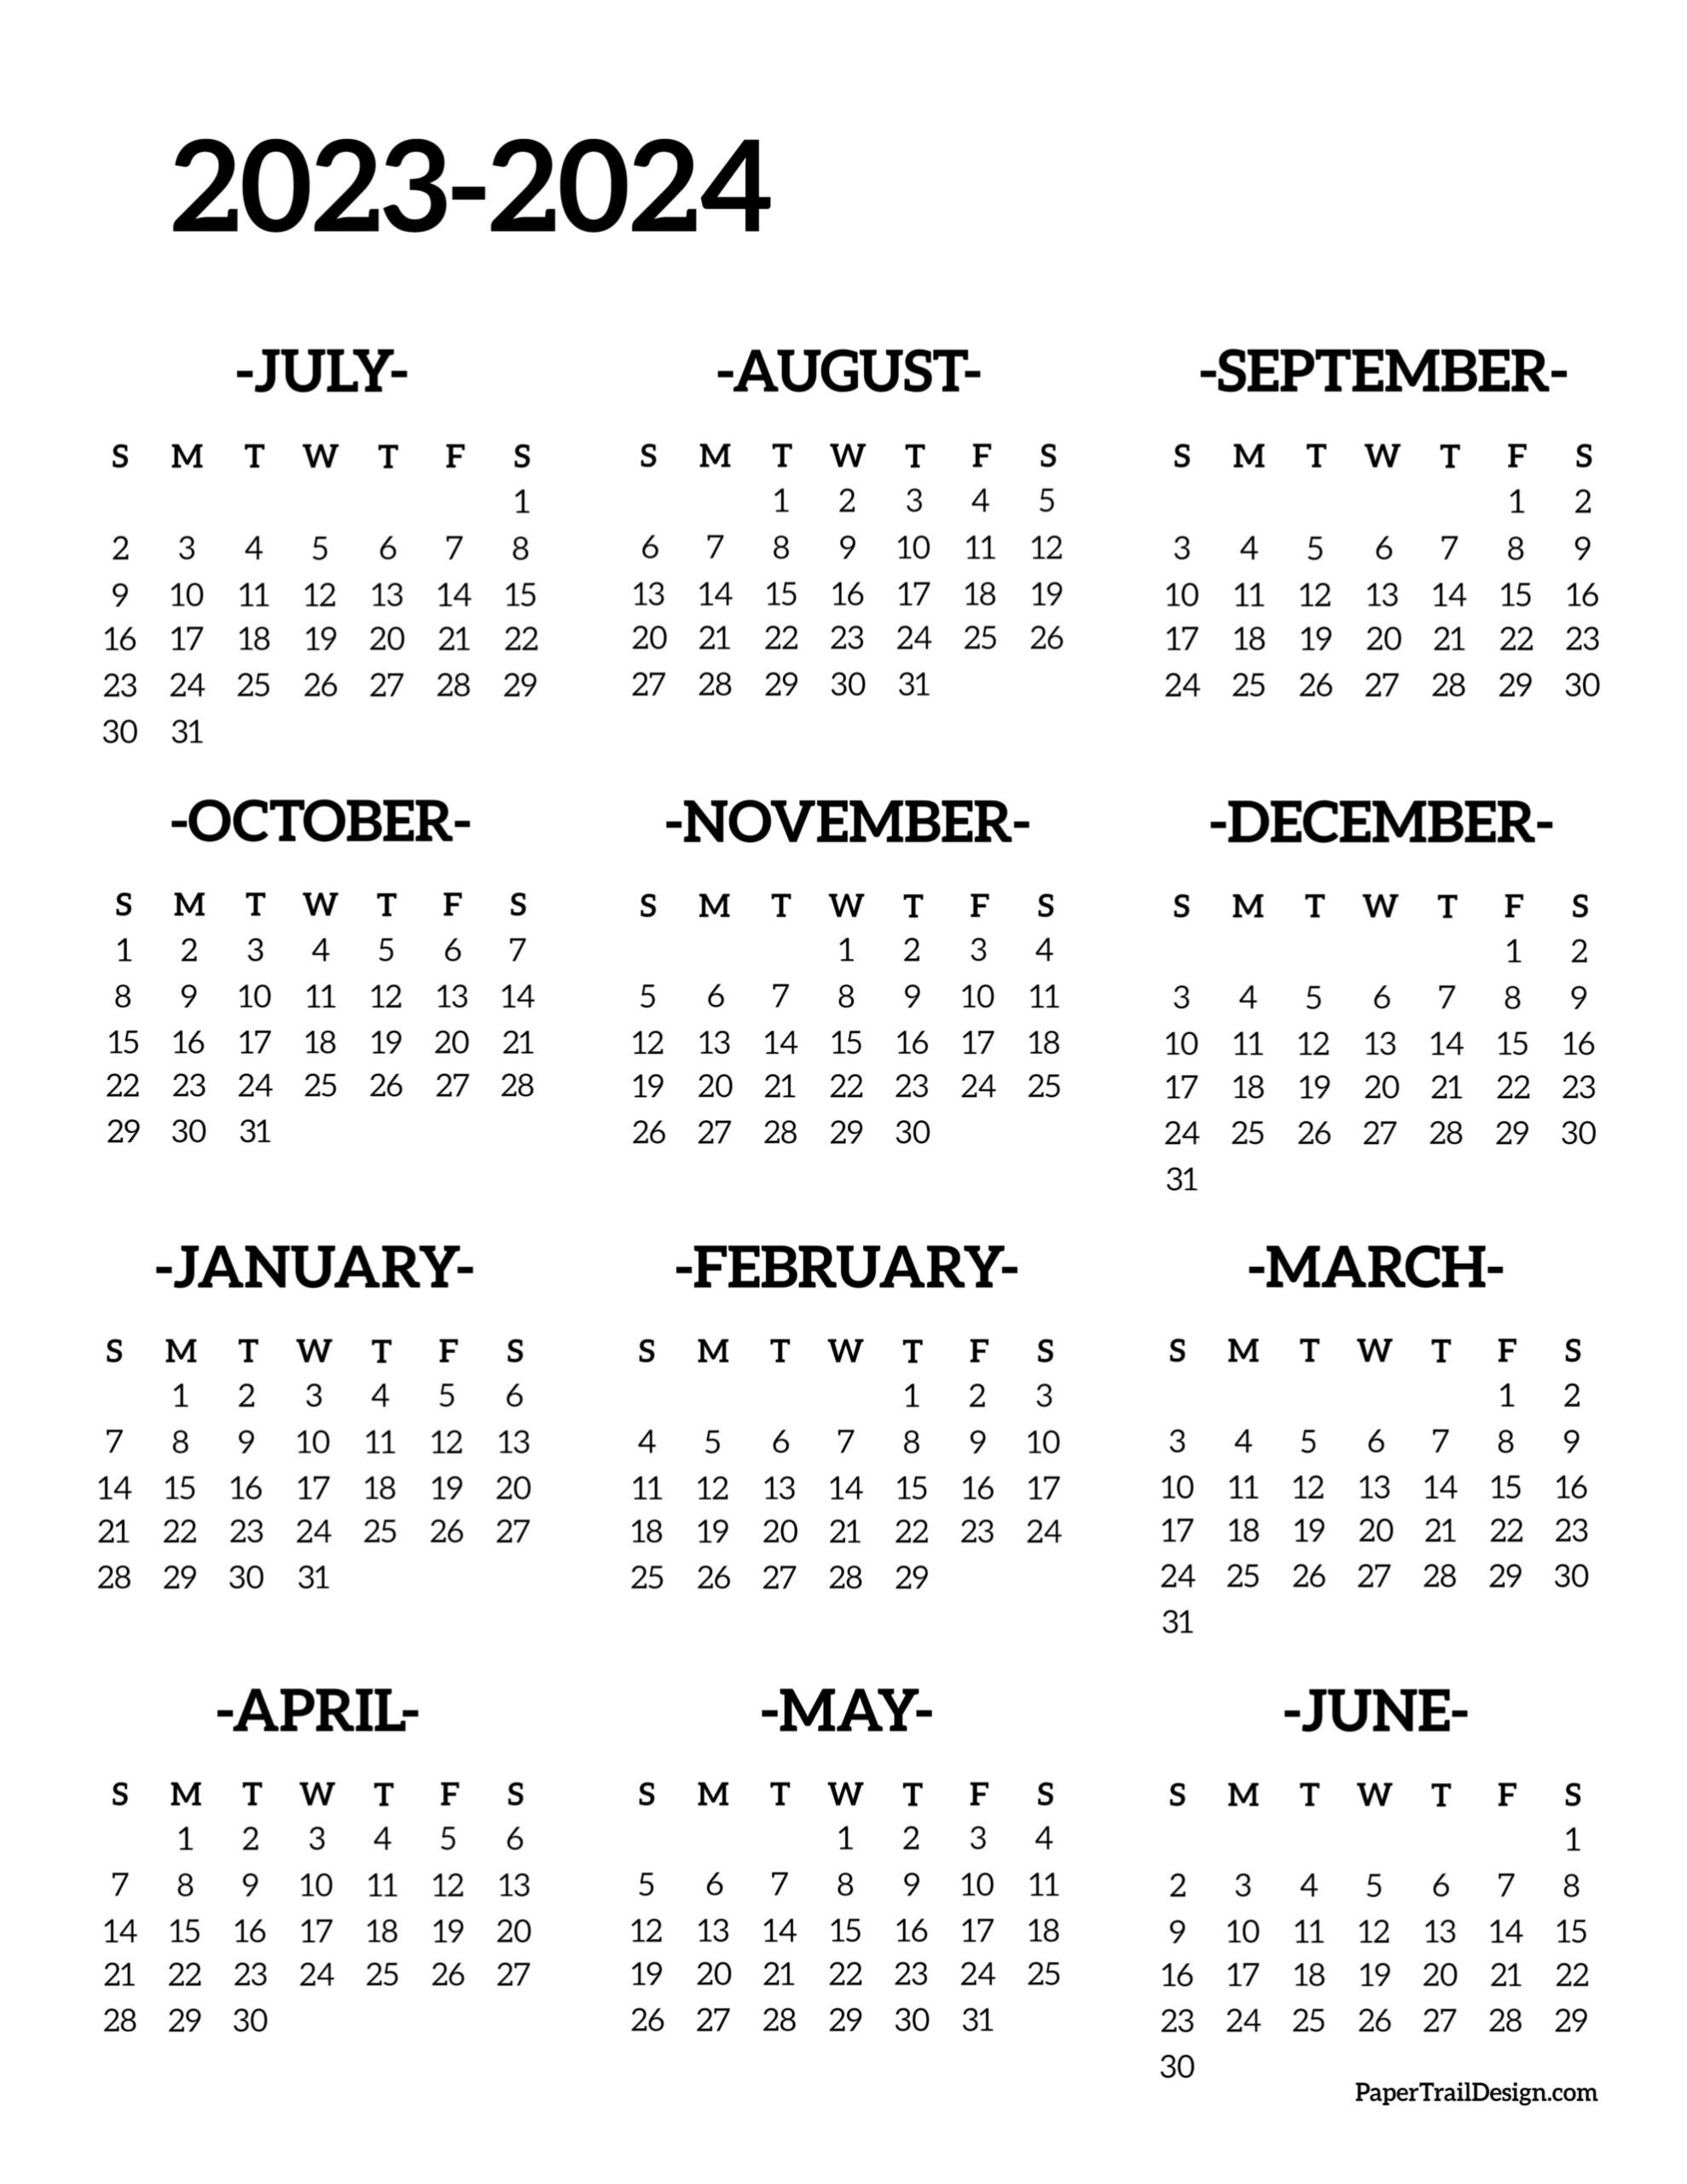 2023-2024 School Year Calendar Free Printable - Paper Trail Design for Printable Calendar For 2023 And 2024